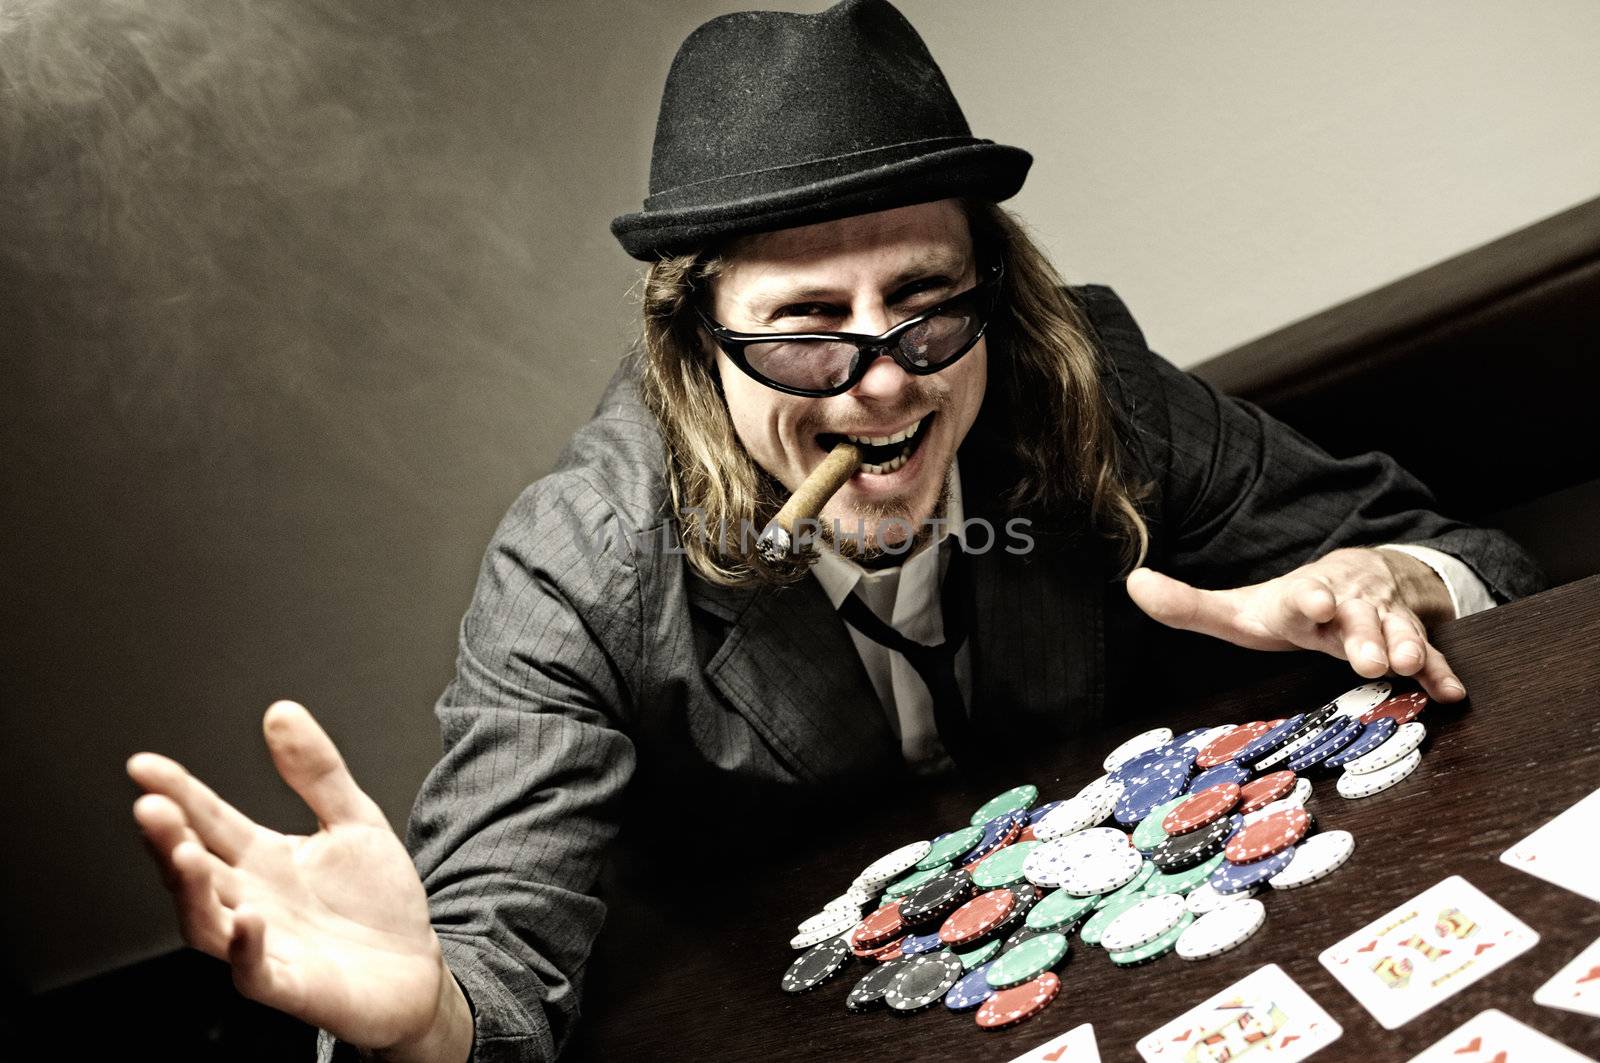 Man with hat and glasses playing underground poker.